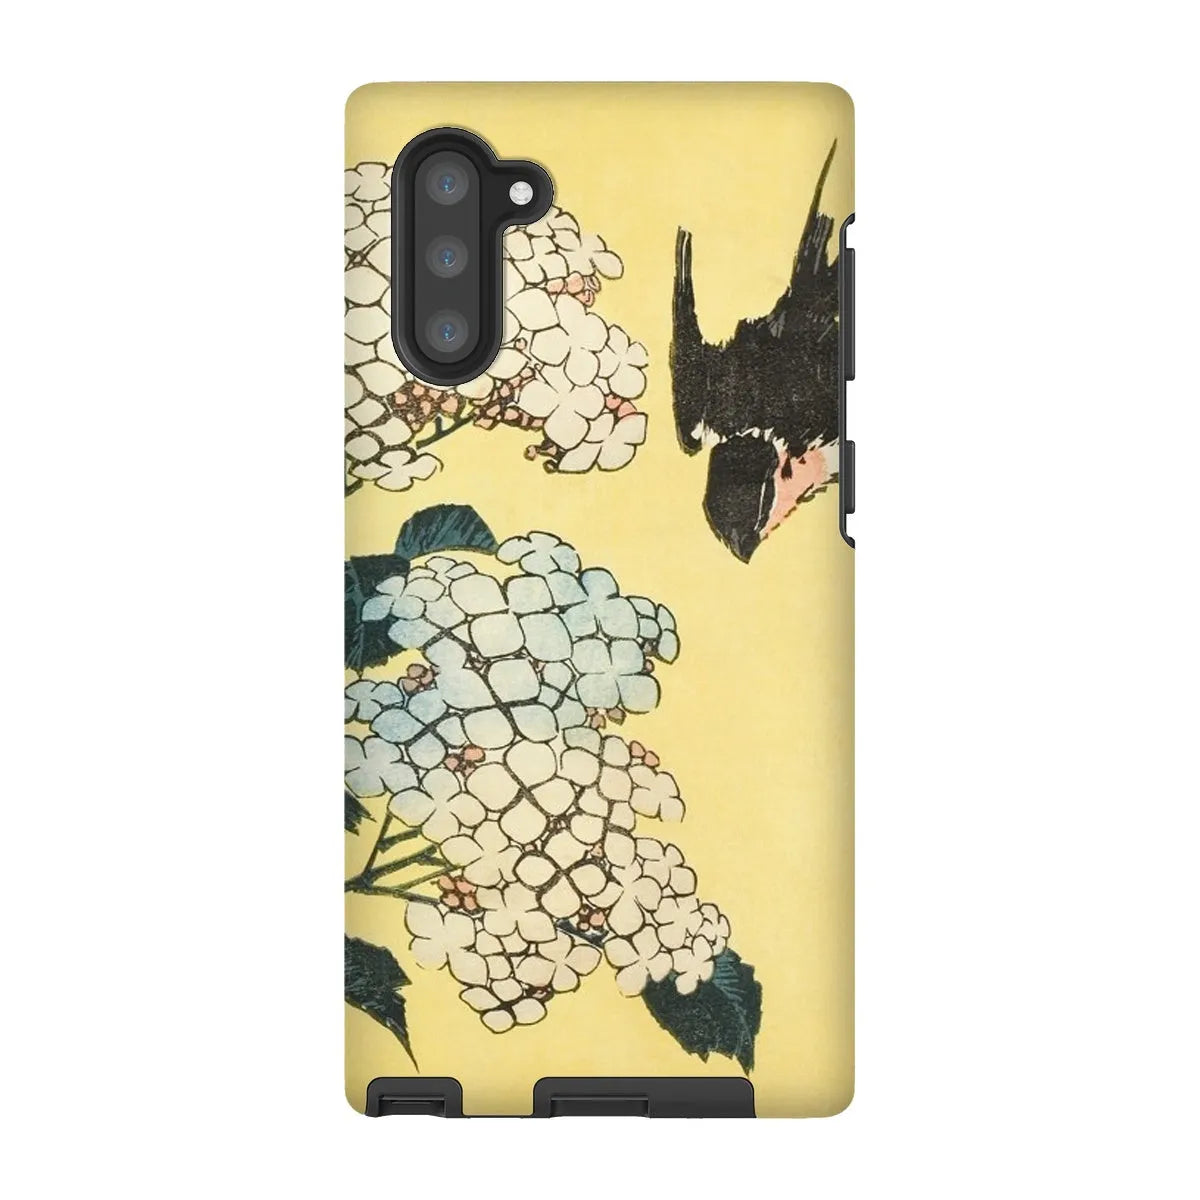 Hydrangea And Swallow - Japanese Art Phone Case - Hokusai - Samsung Galaxy Note 10 / Matte - Mobile Phone Cases